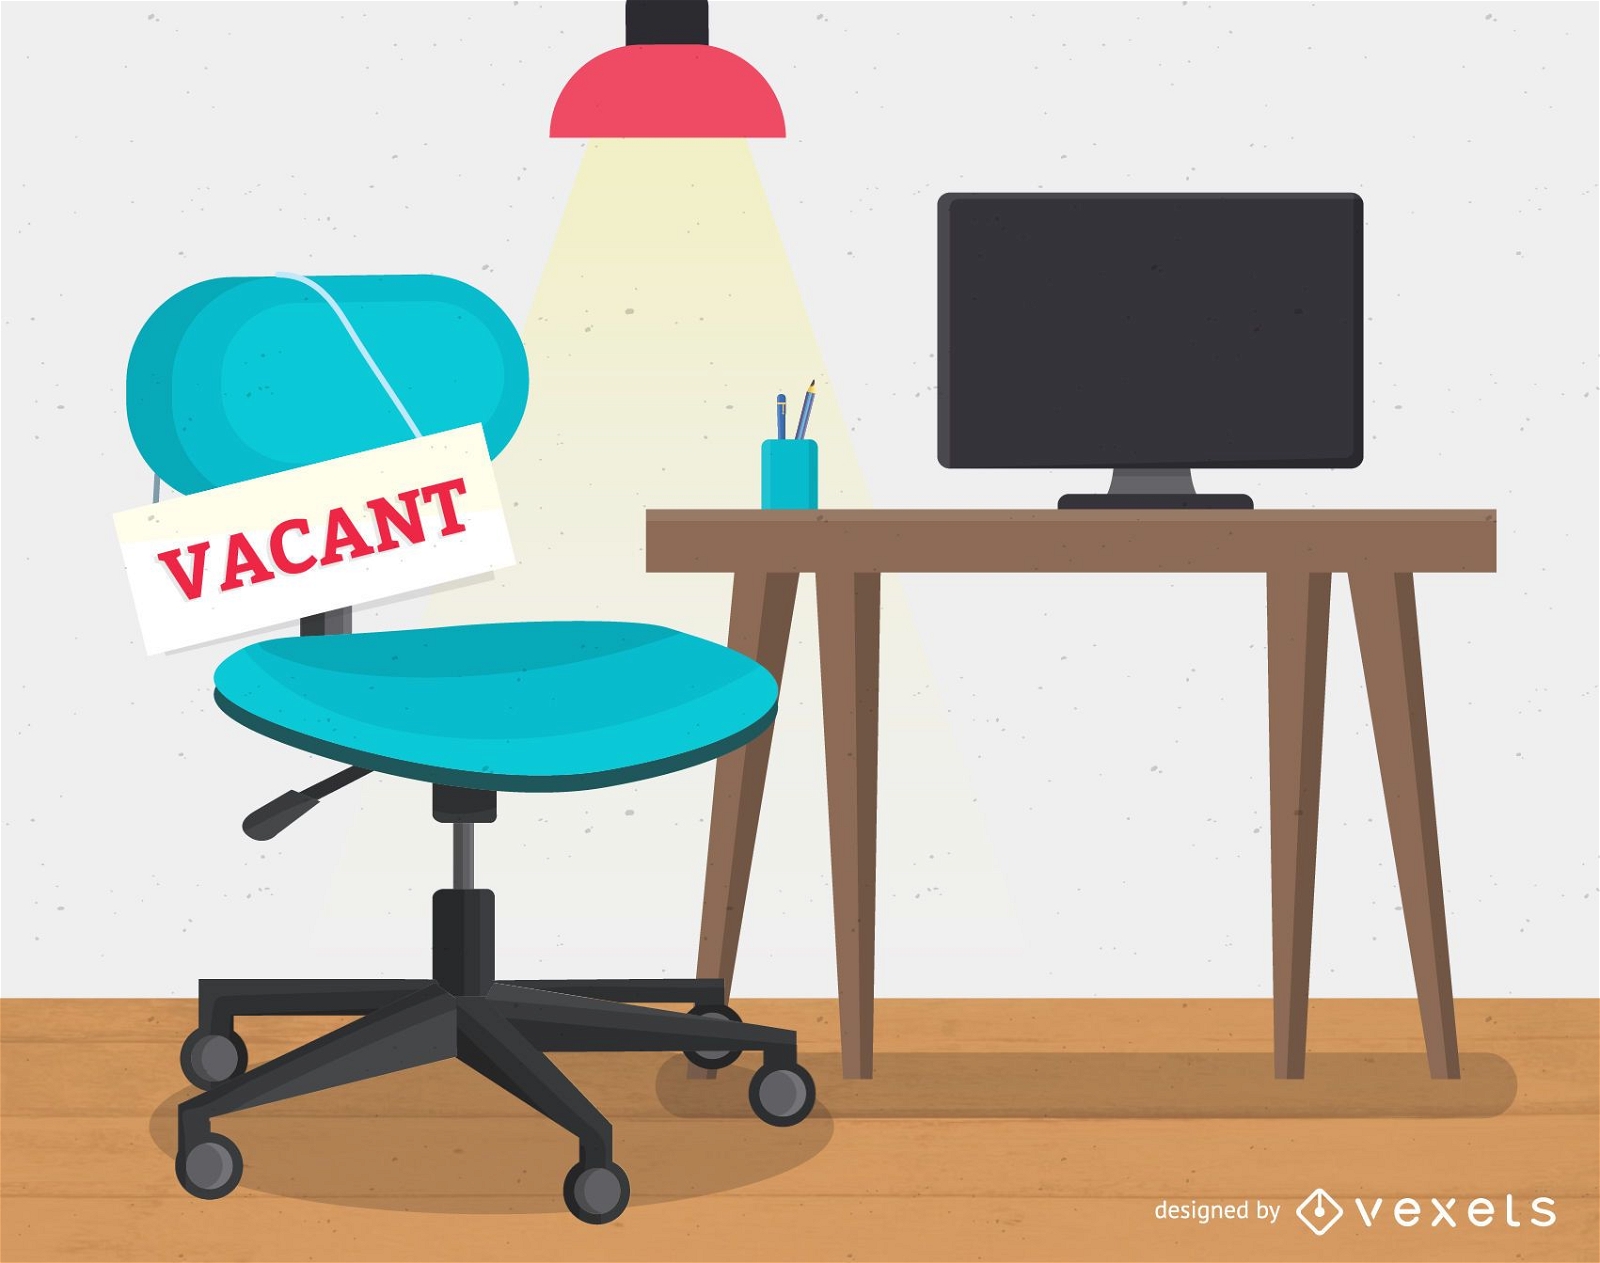 Vacant workplace job hire illustration